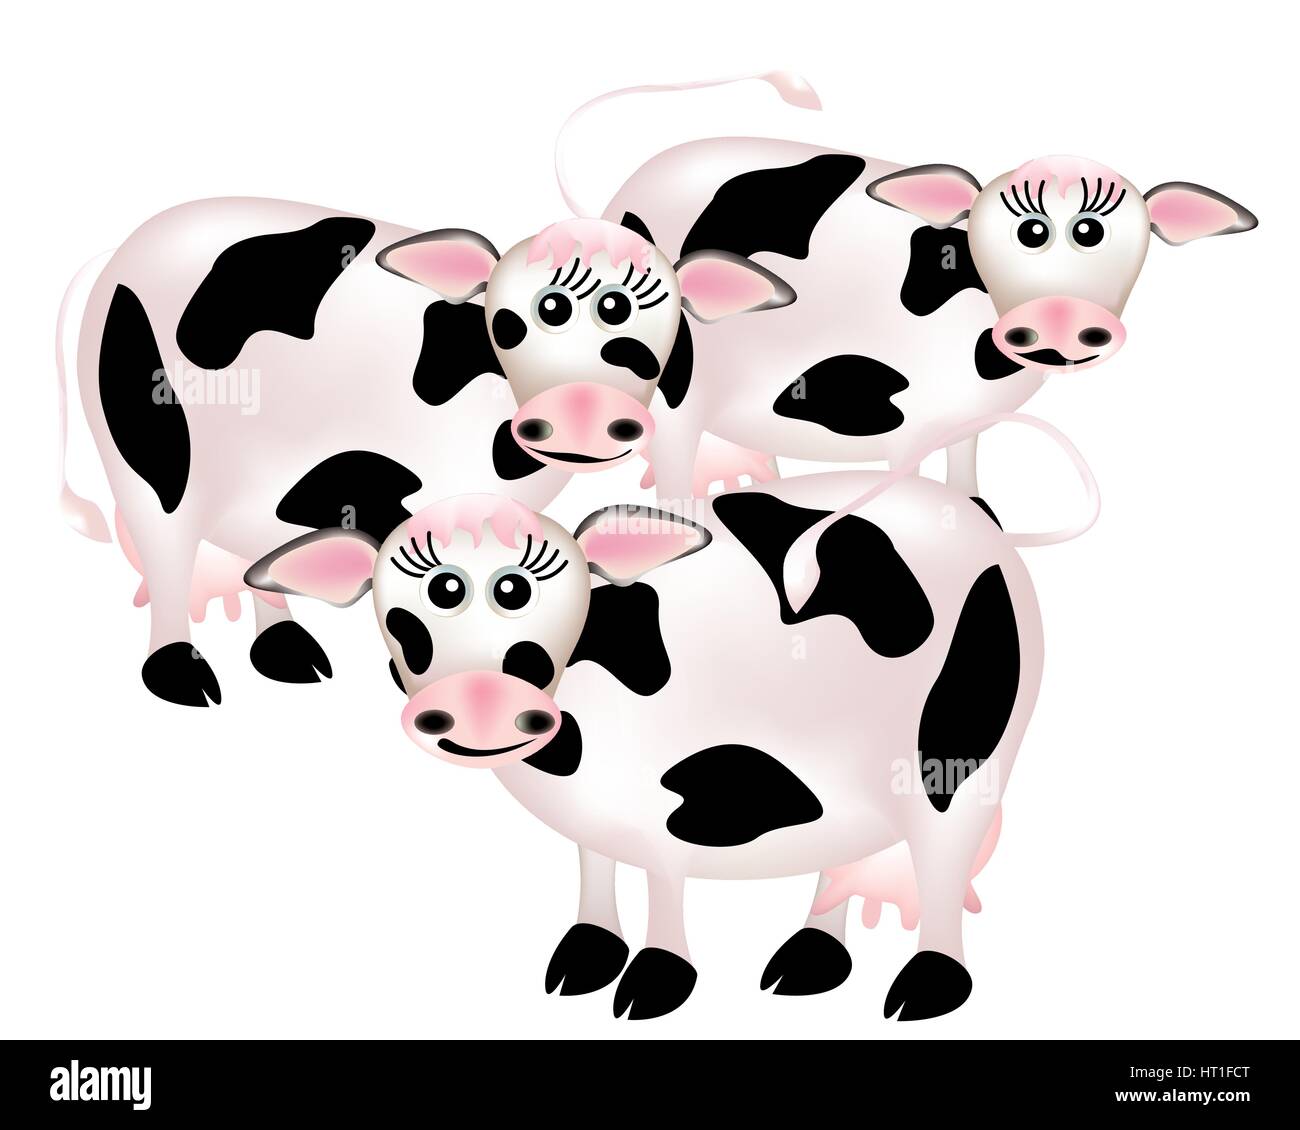 Group of cows Stock Vector